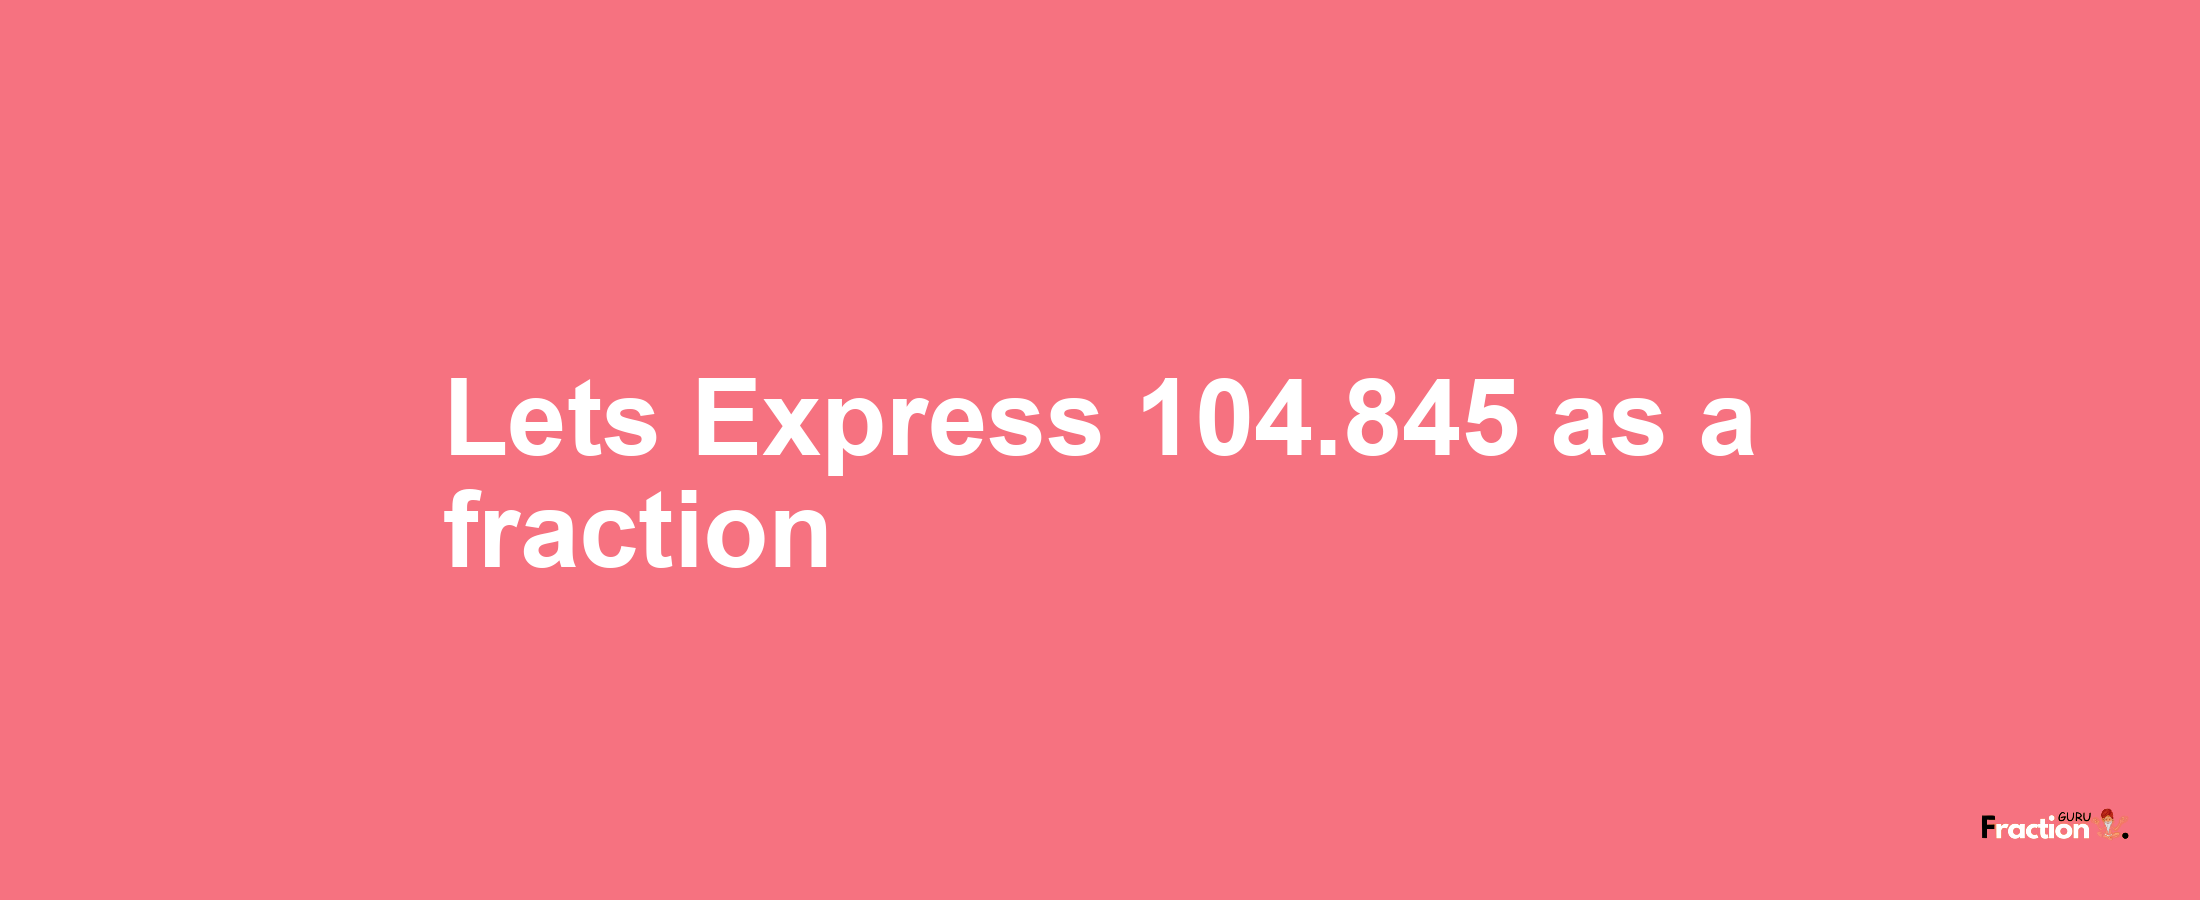 Lets Express 104.845 as afraction